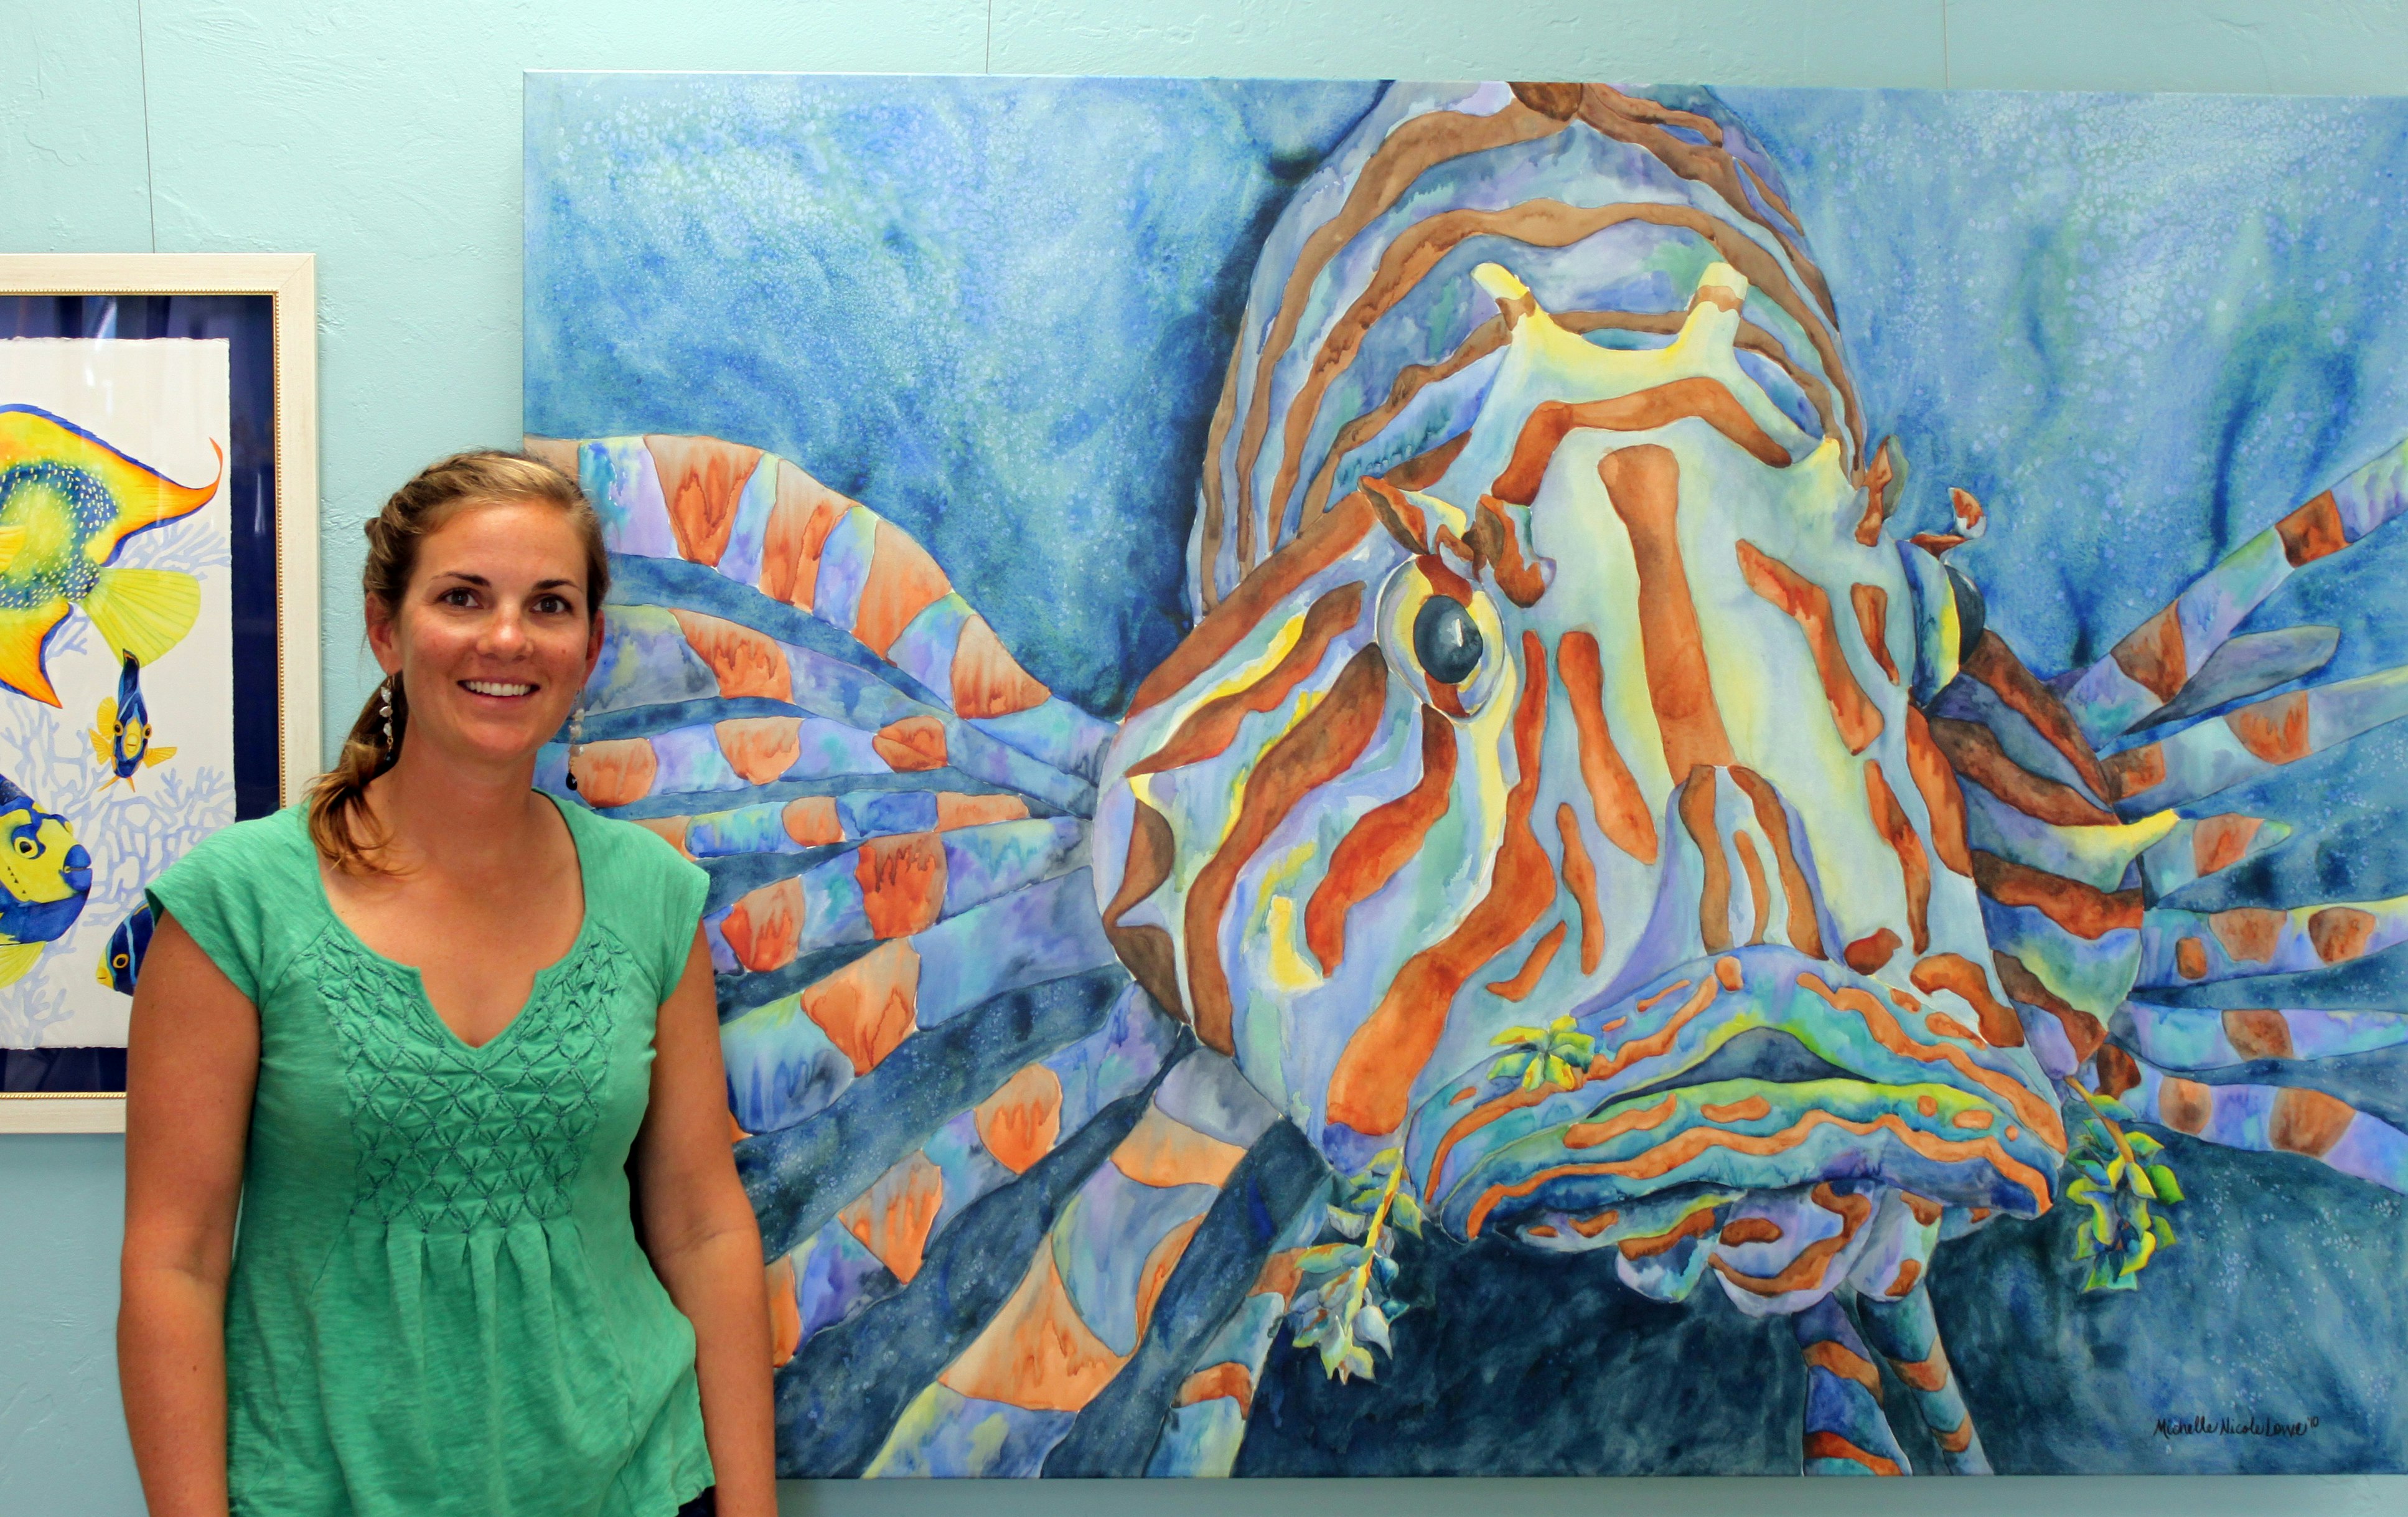 A blonde woman in a green blouse smiles as she stands next to her painting, a large watercolor canvas depicting a large colorful lionfish